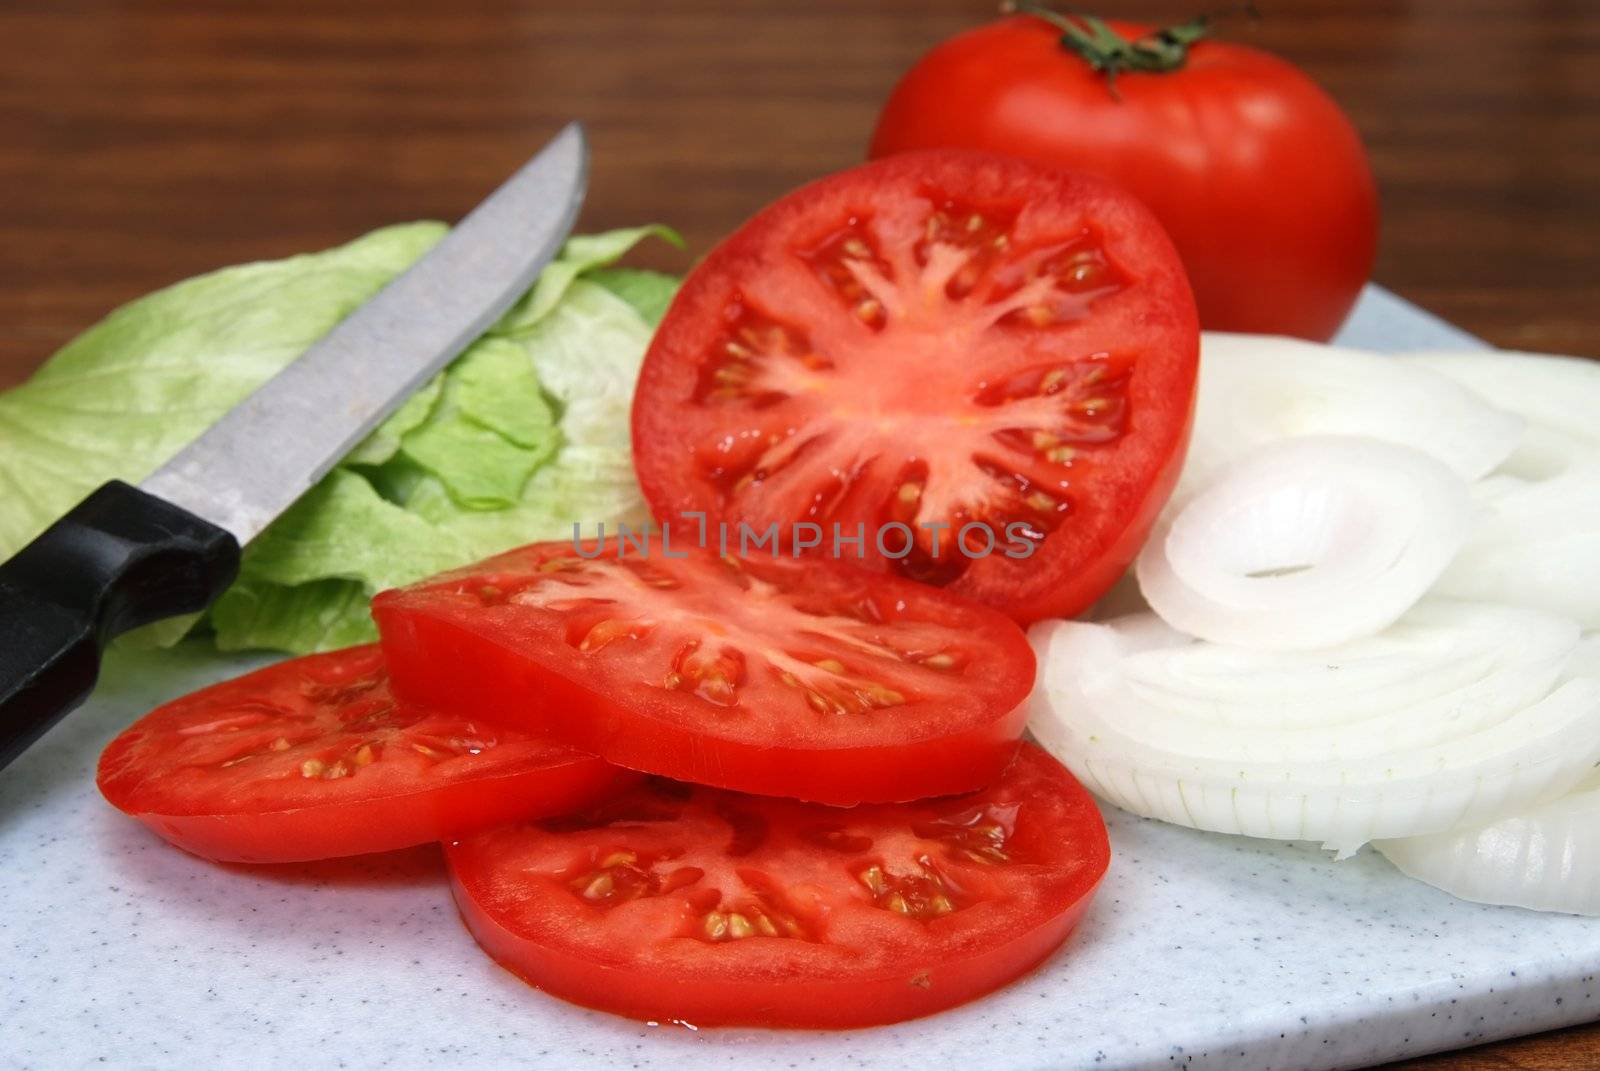 Tomato, Lettuce, and Onions by dehooks